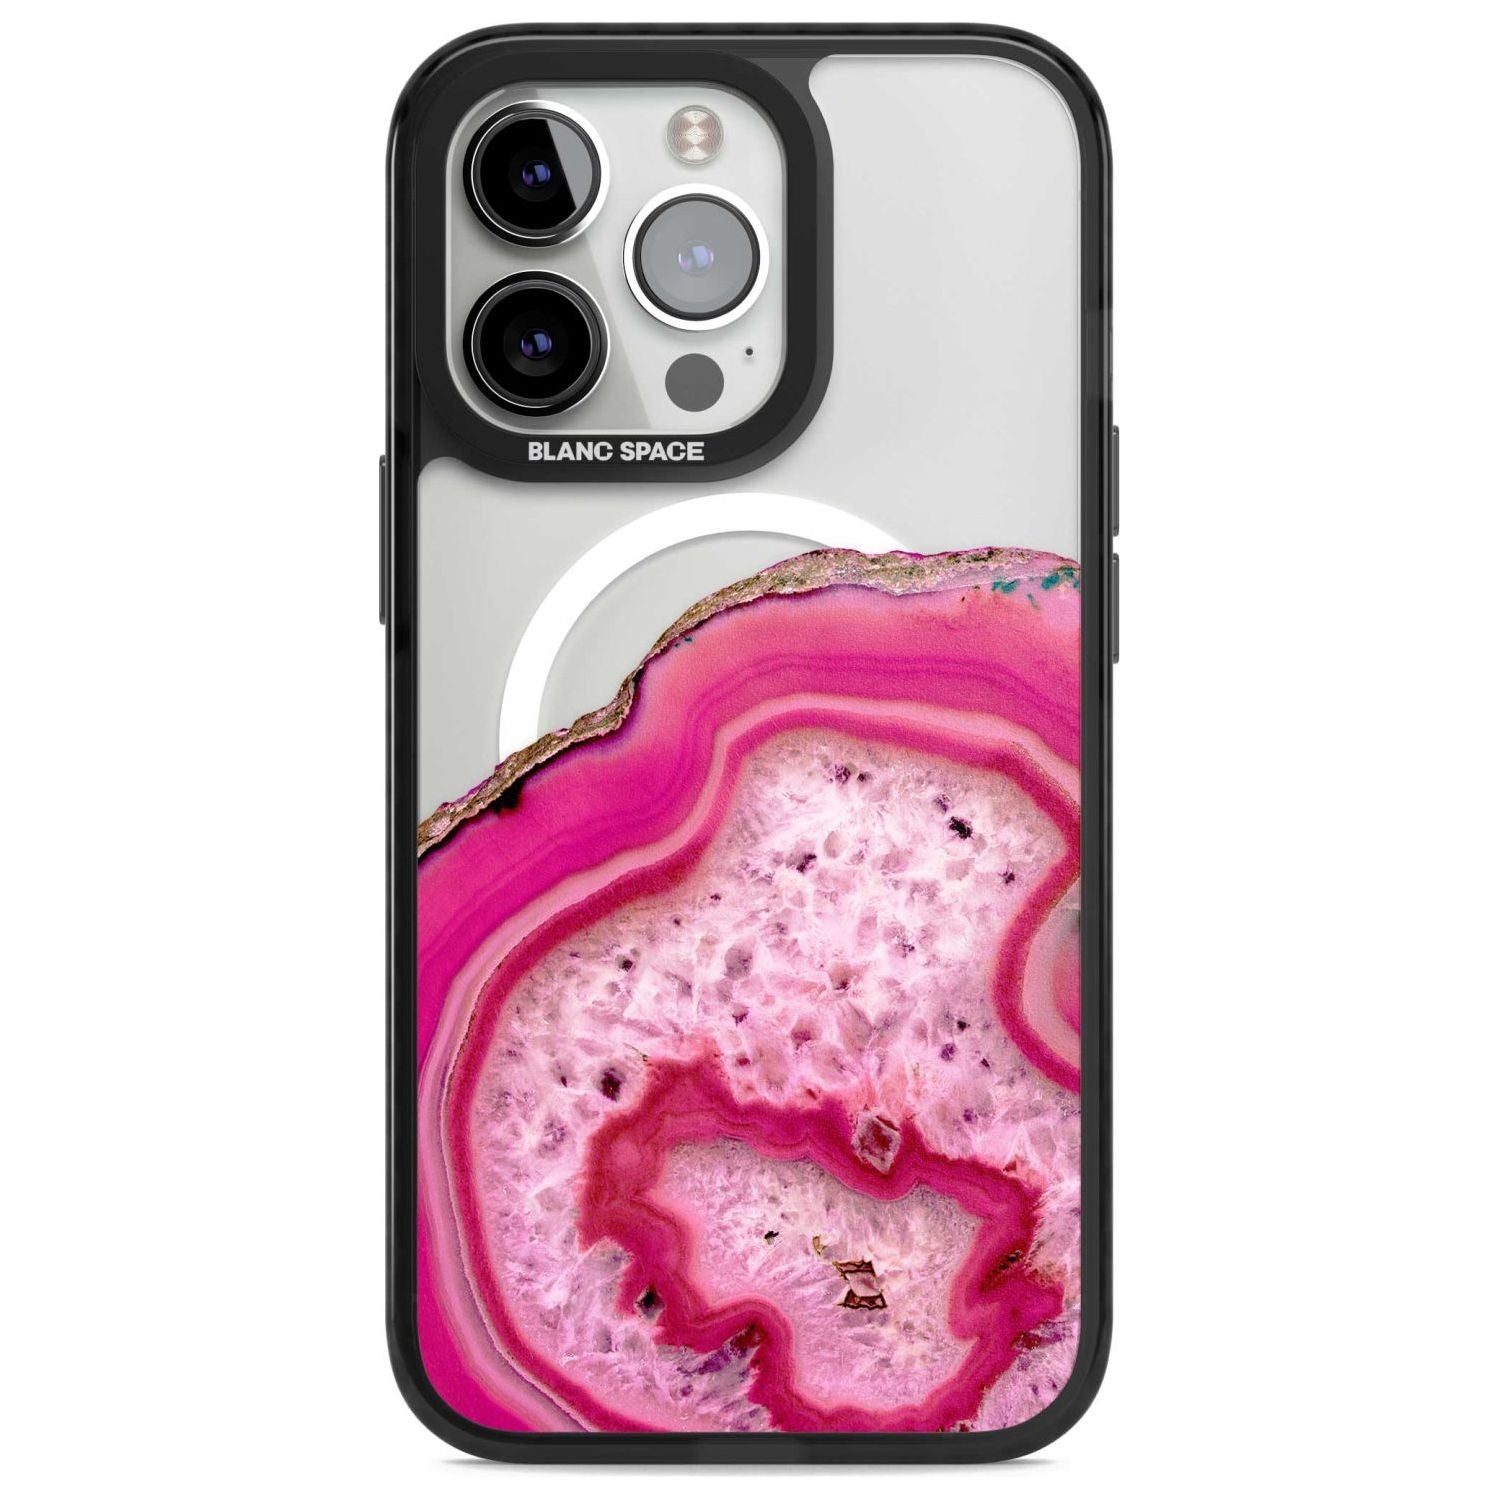 Bright Pink Gemstone Crystal Clear Design Phone Case iPhone 15 Pro Max / Magsafe Black Impact Case,iPhone 15 Pro / Magsafe Black Impact Case,iPhone 14 Pro Max / Magsafe Black Impact Case,iPhone 14 Pro / Magsafe Black Impact Case,iPhone 13 Pro / Magsafe Black Impact Case Blanc Space